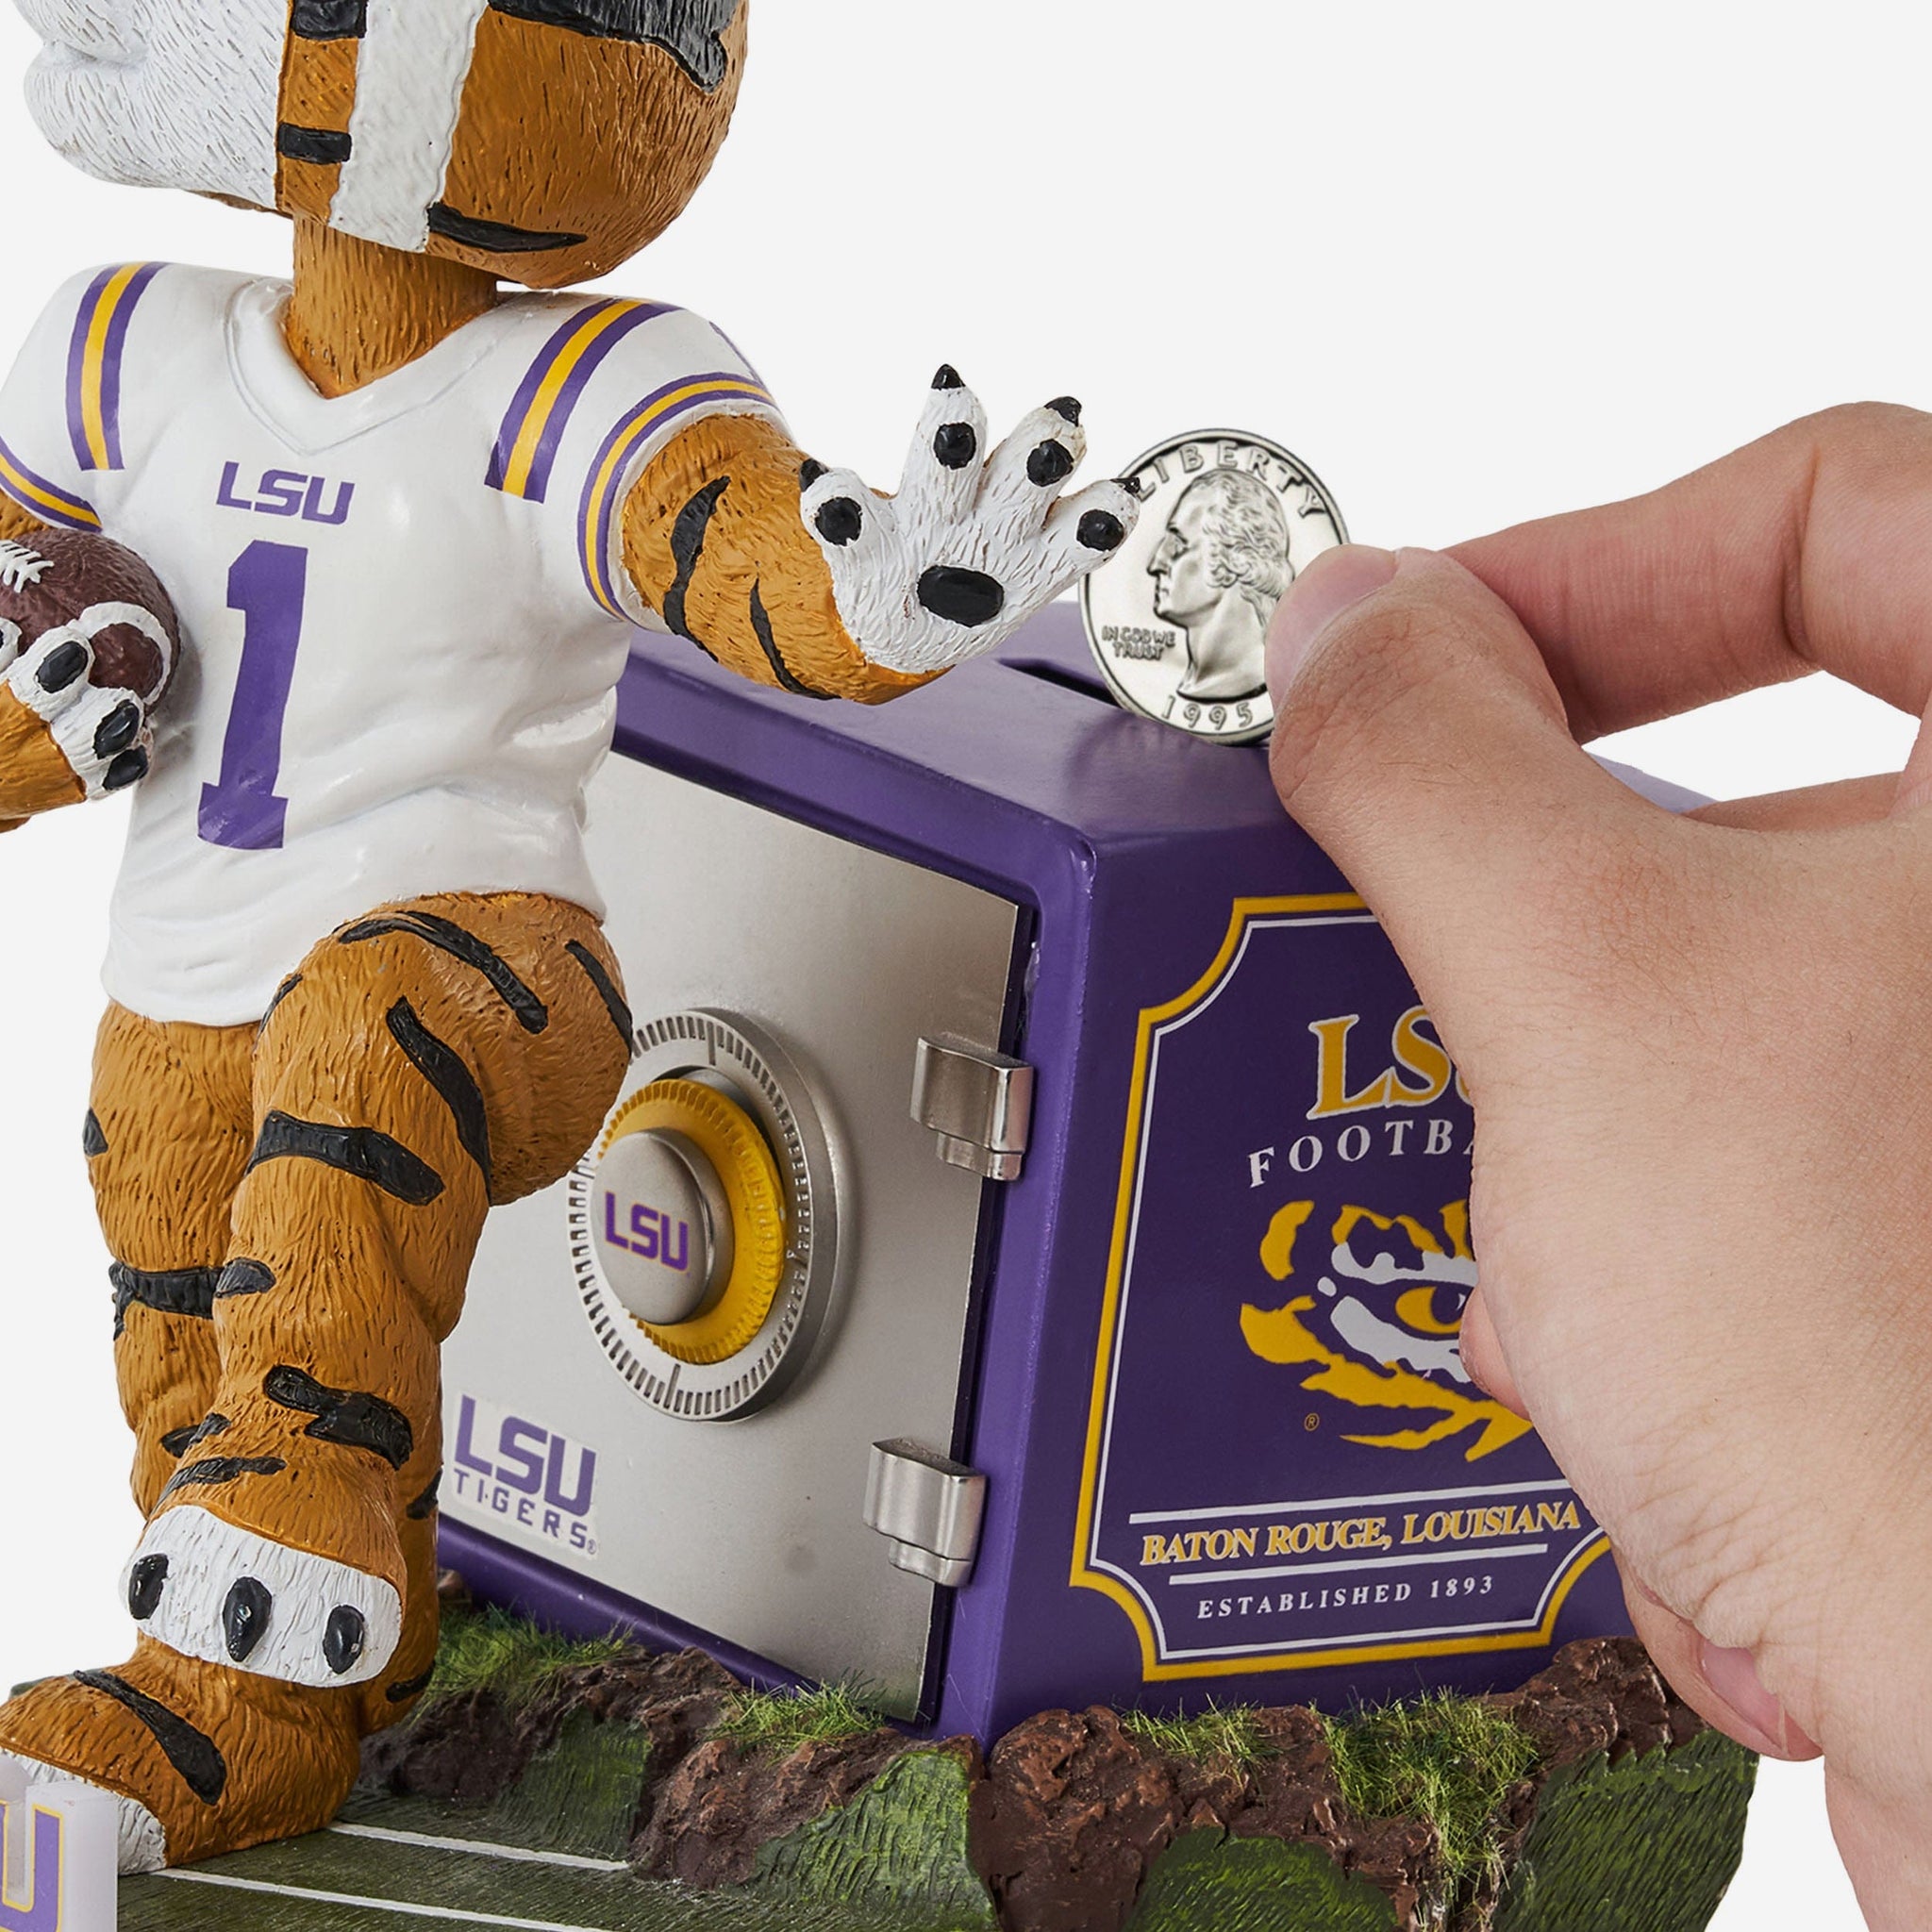 Officially Licensed NCAA Louisiana State Tigers Mini Organizer Wallet